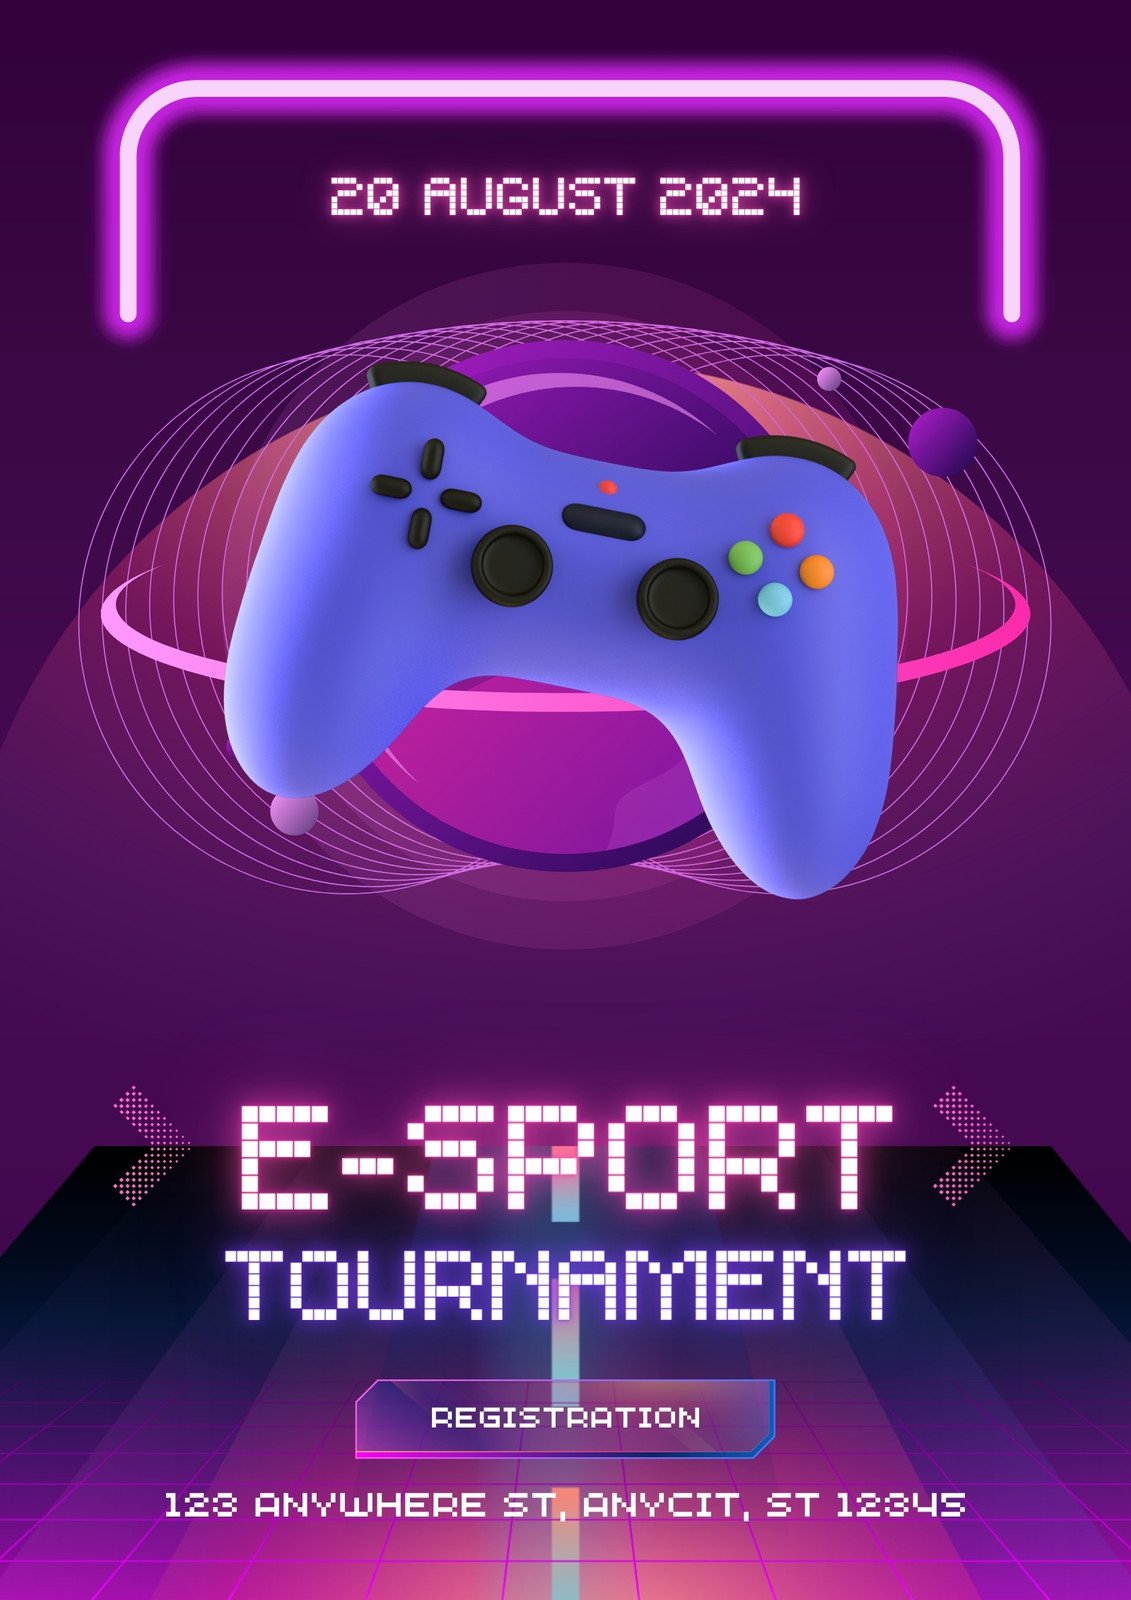 Gaming Tournament Flyer Template - Free Download